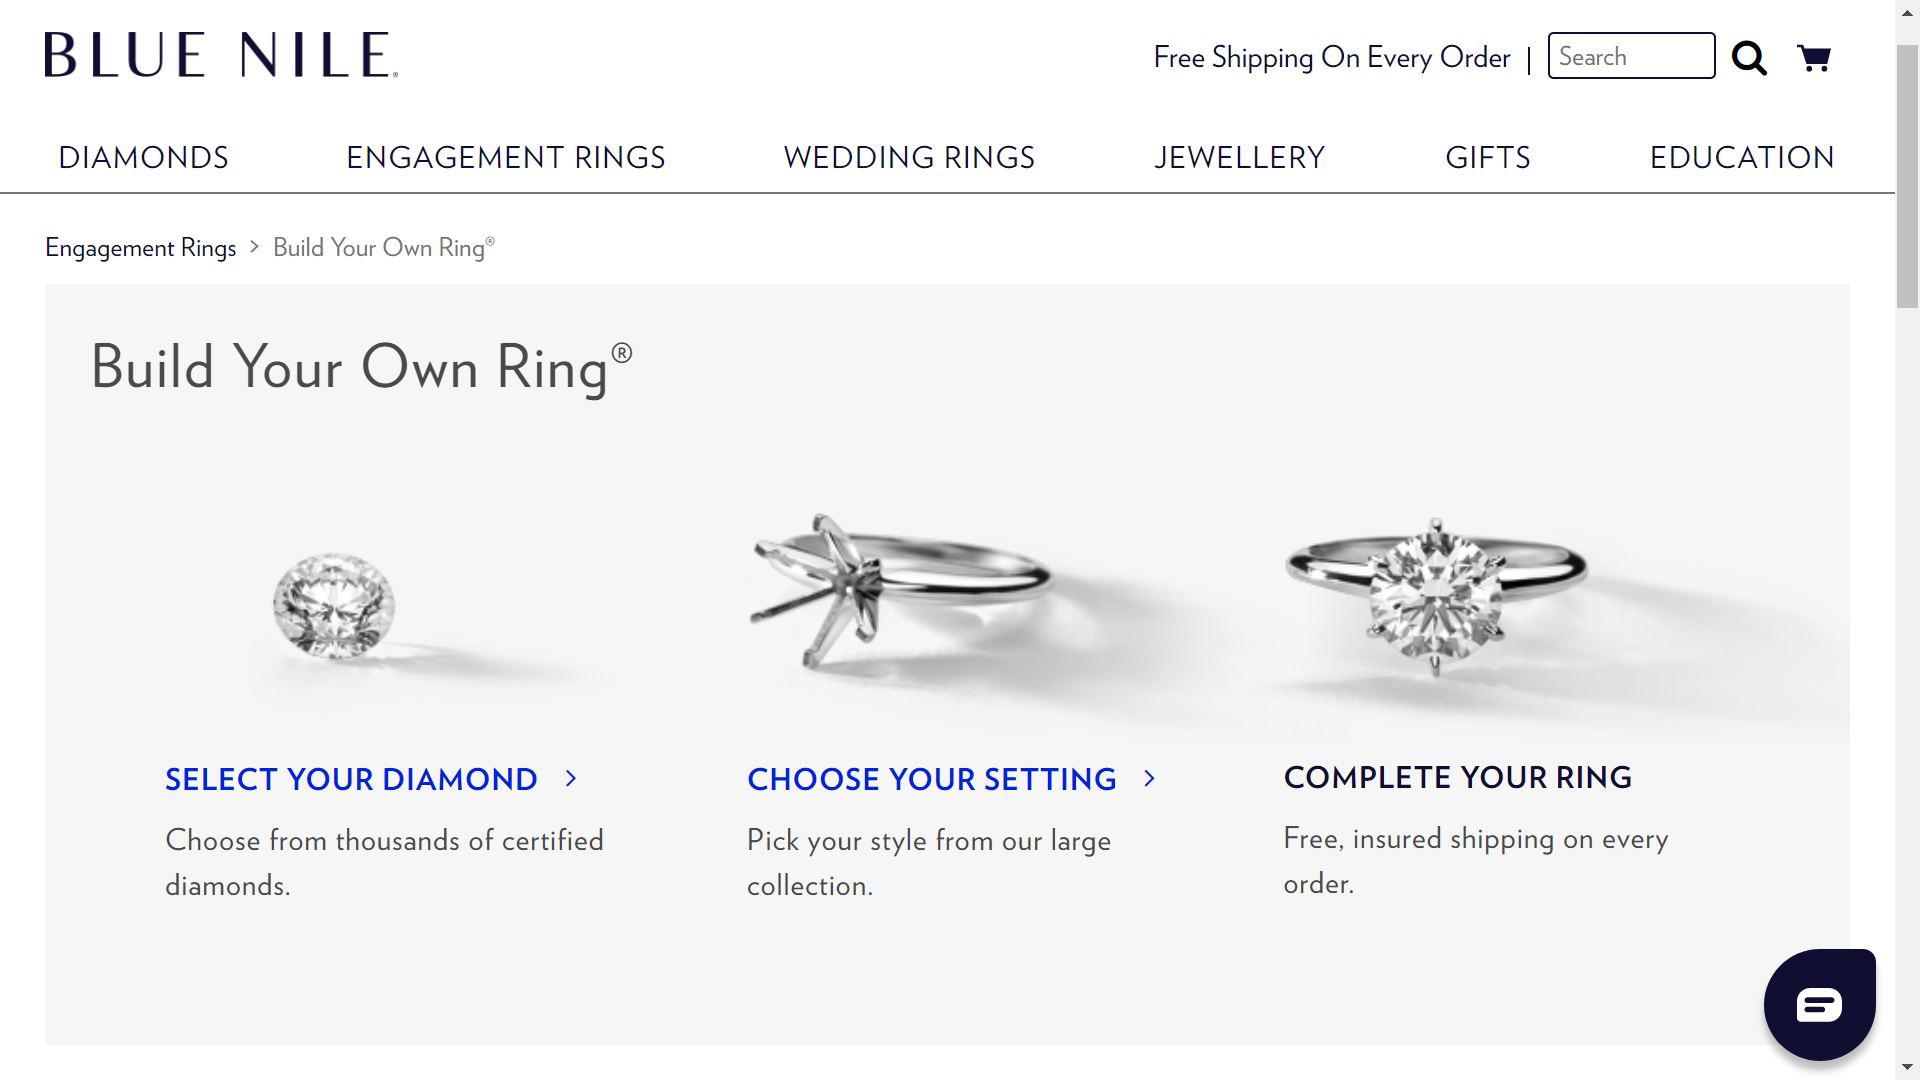 Co-creation - Blue Nile lets you design your own diamond engagement ring.